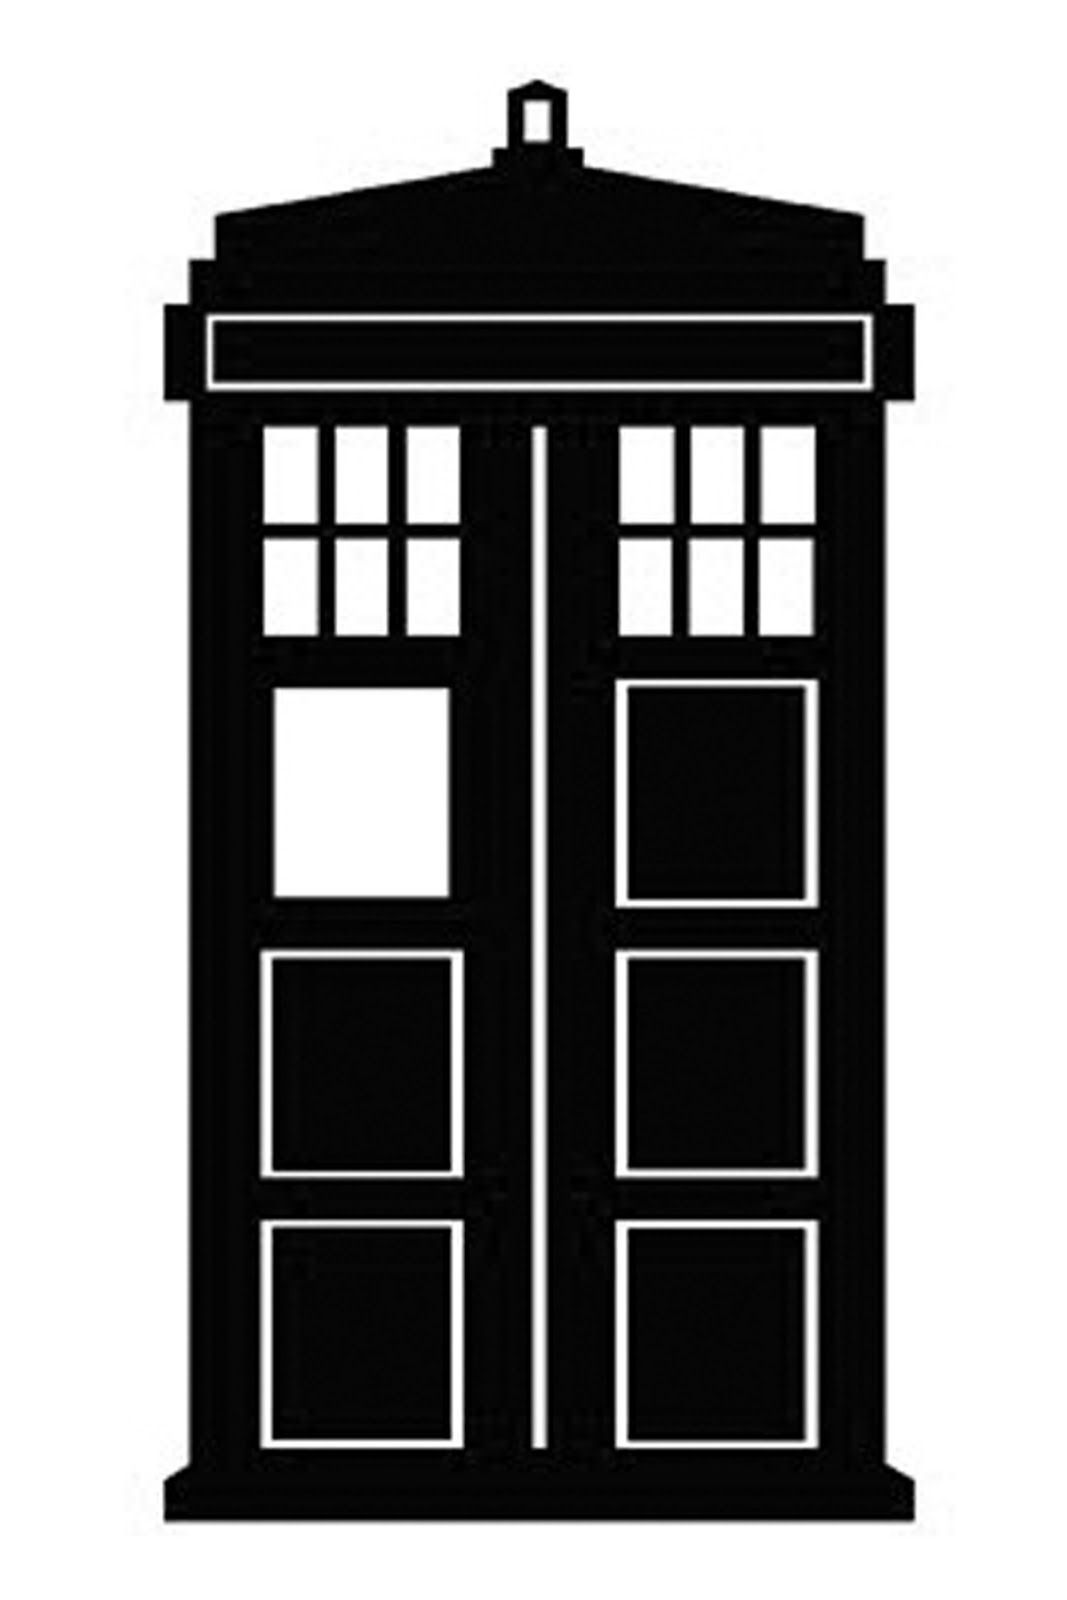 Clipart Doctor Who INSTANT .